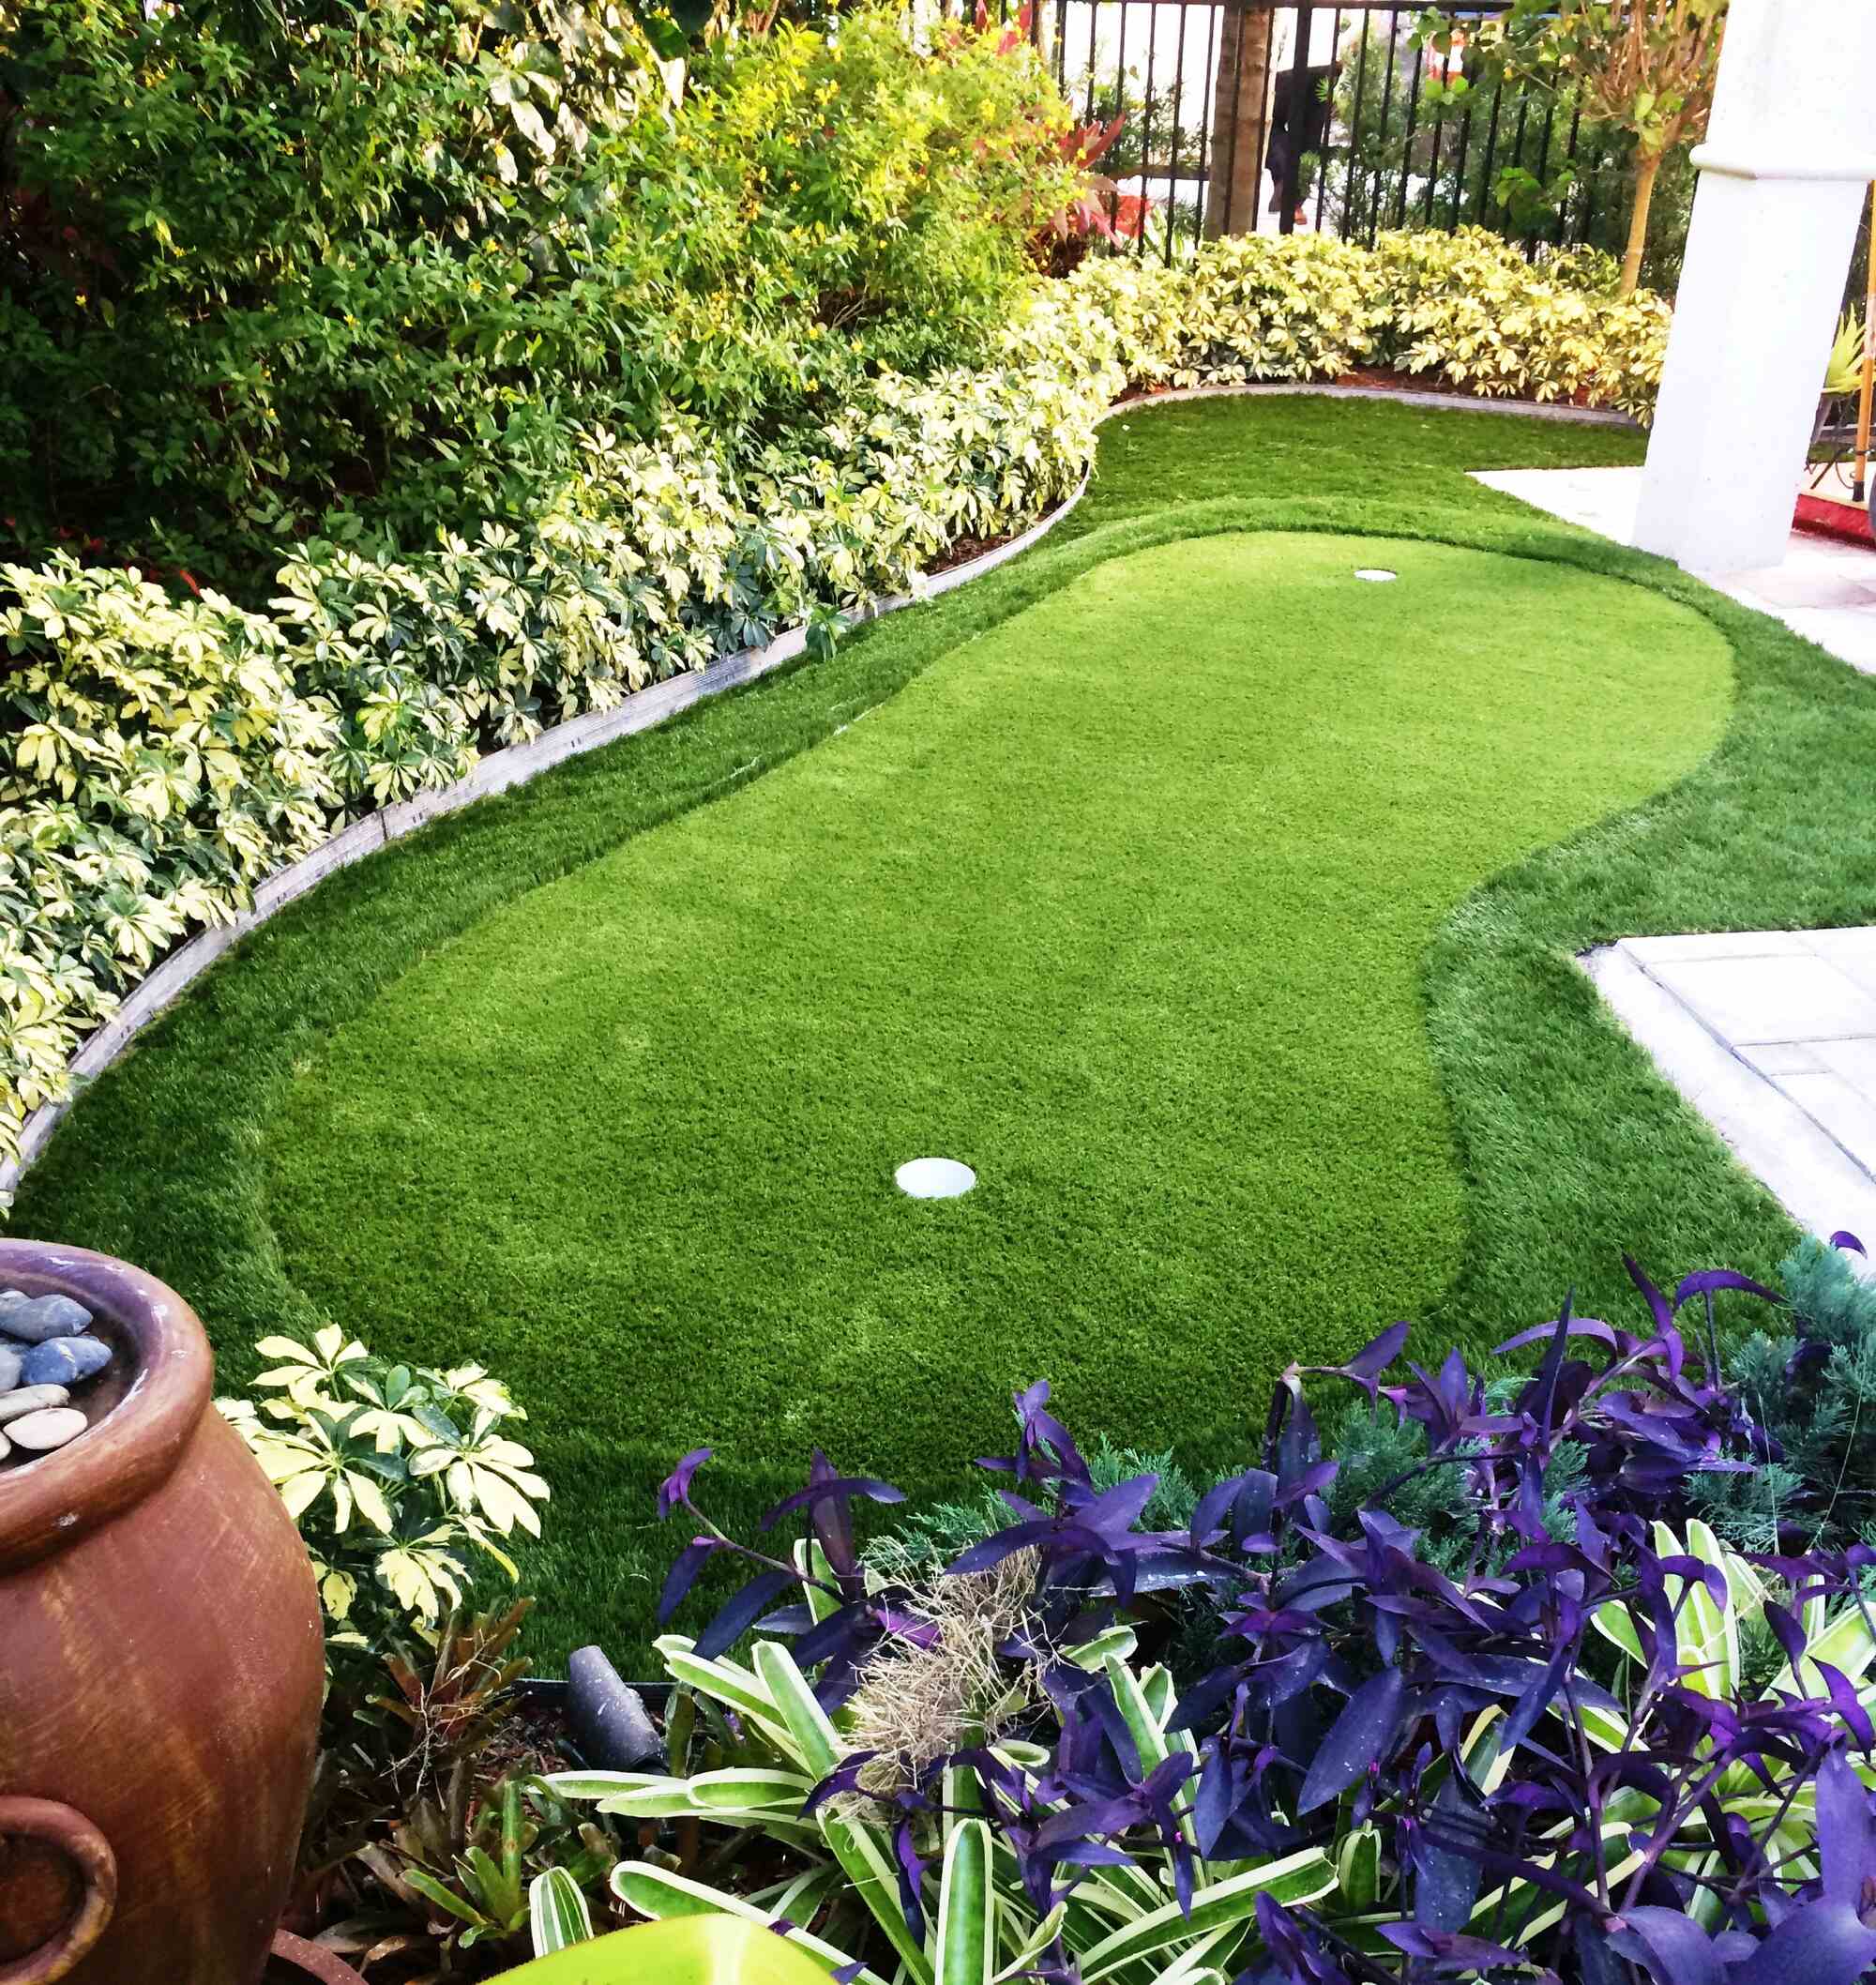 Photograph of a small putting green made of synthetic turf that appears to be near a residence. The putting green is roughly oval with two holes in it.